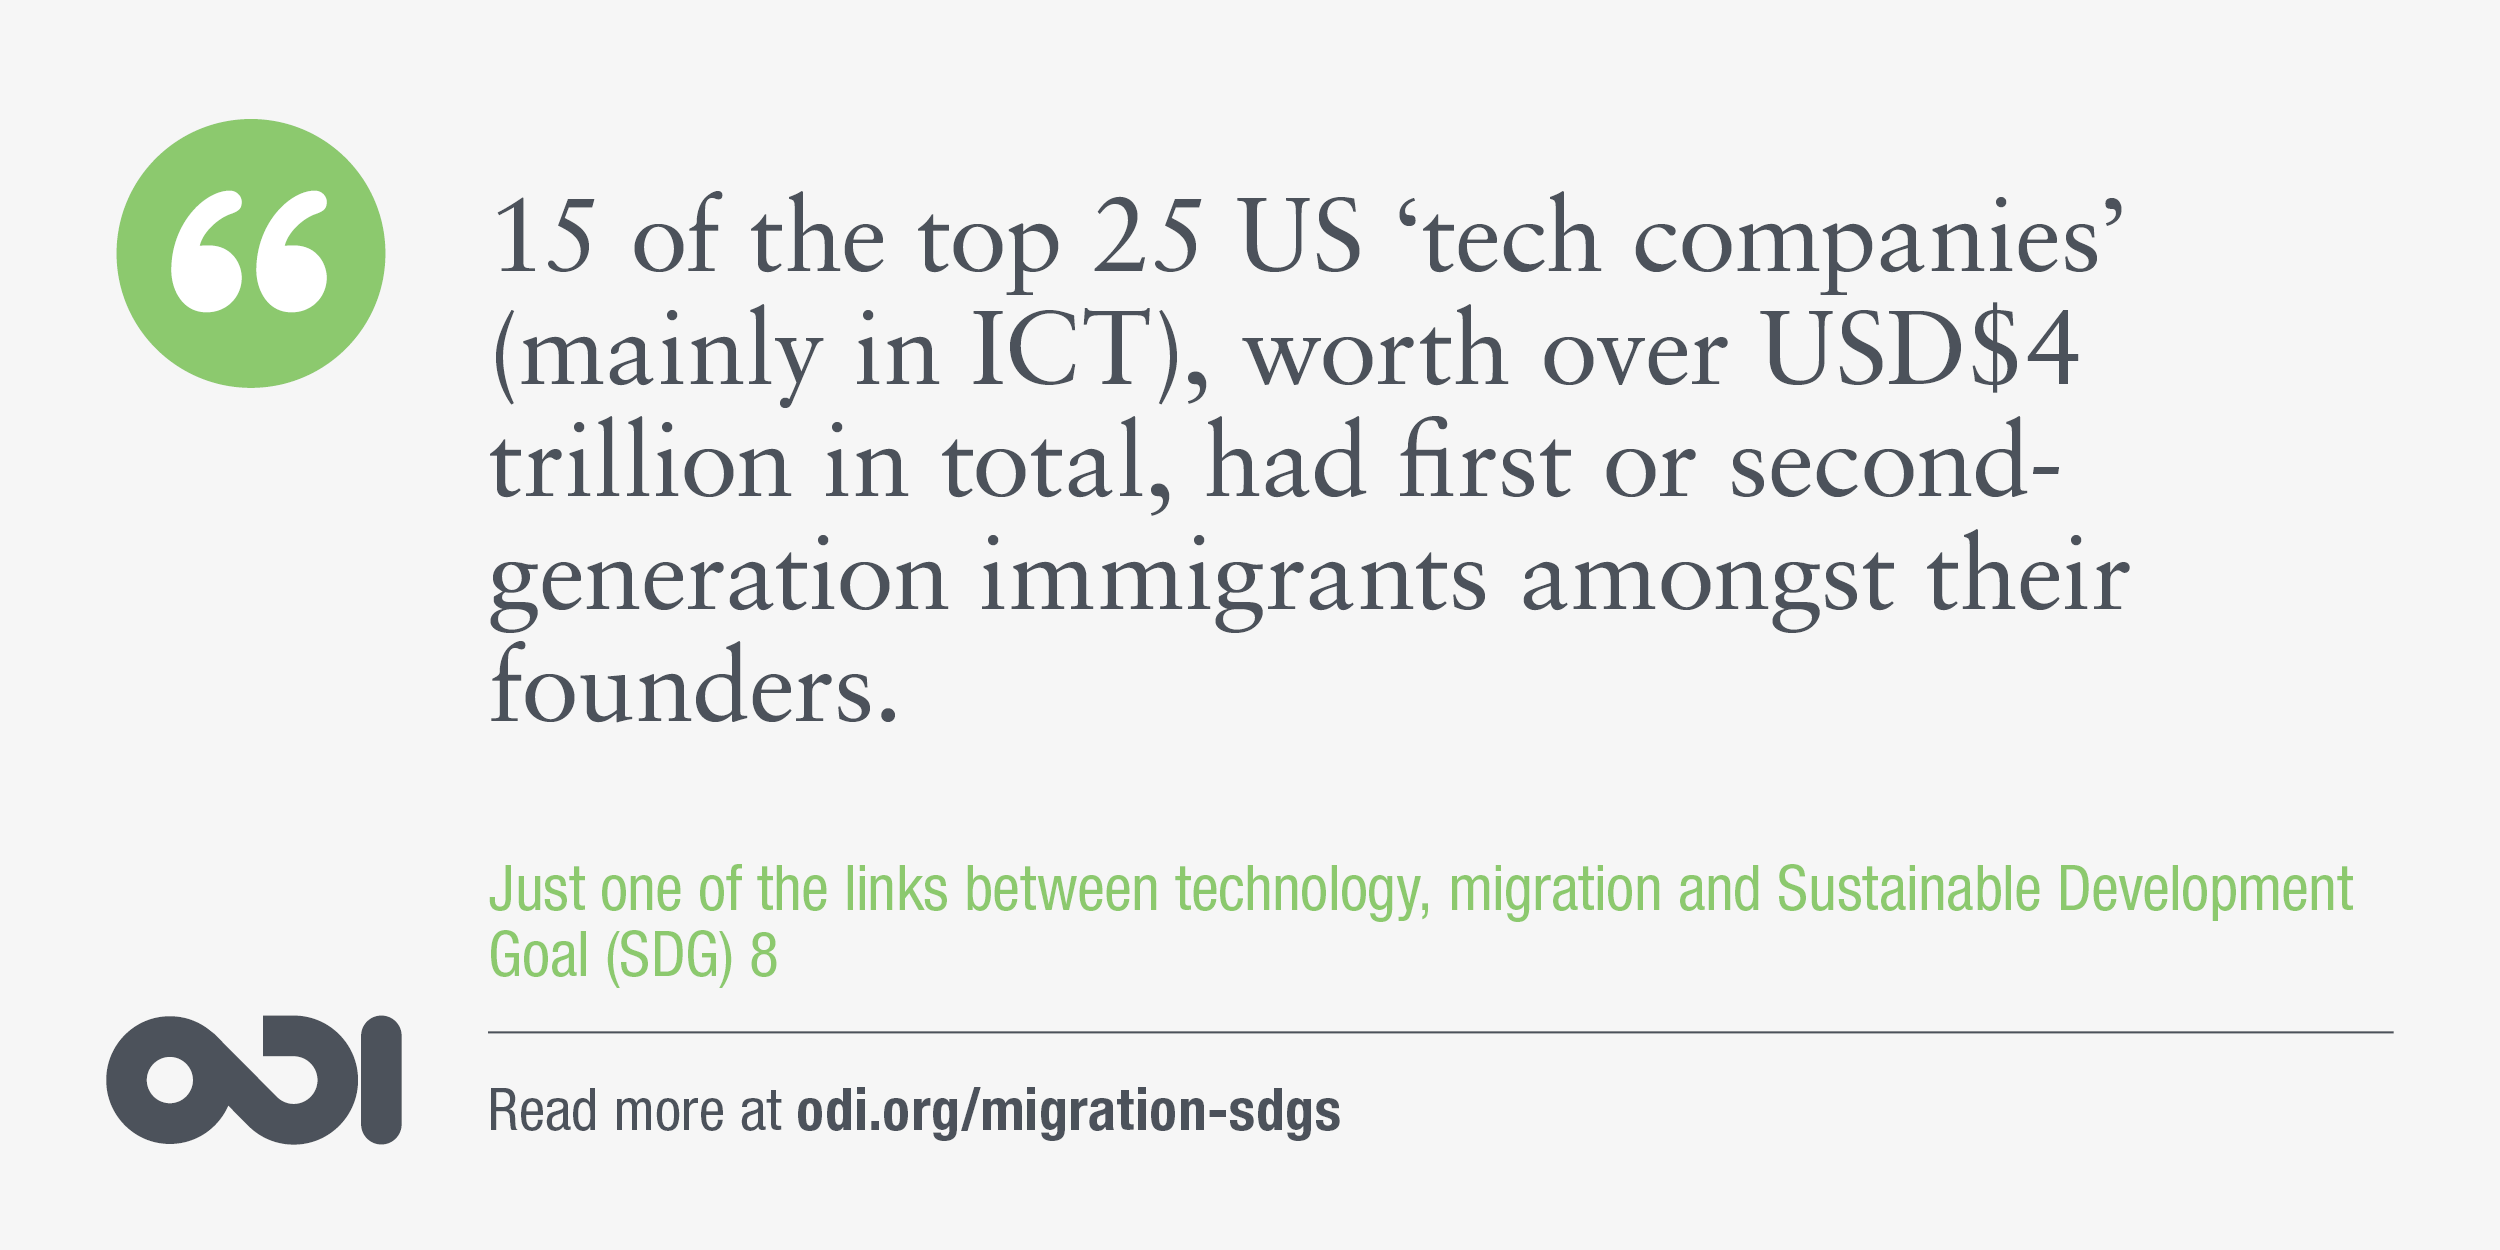 The links between technology, migration and SDG 8.